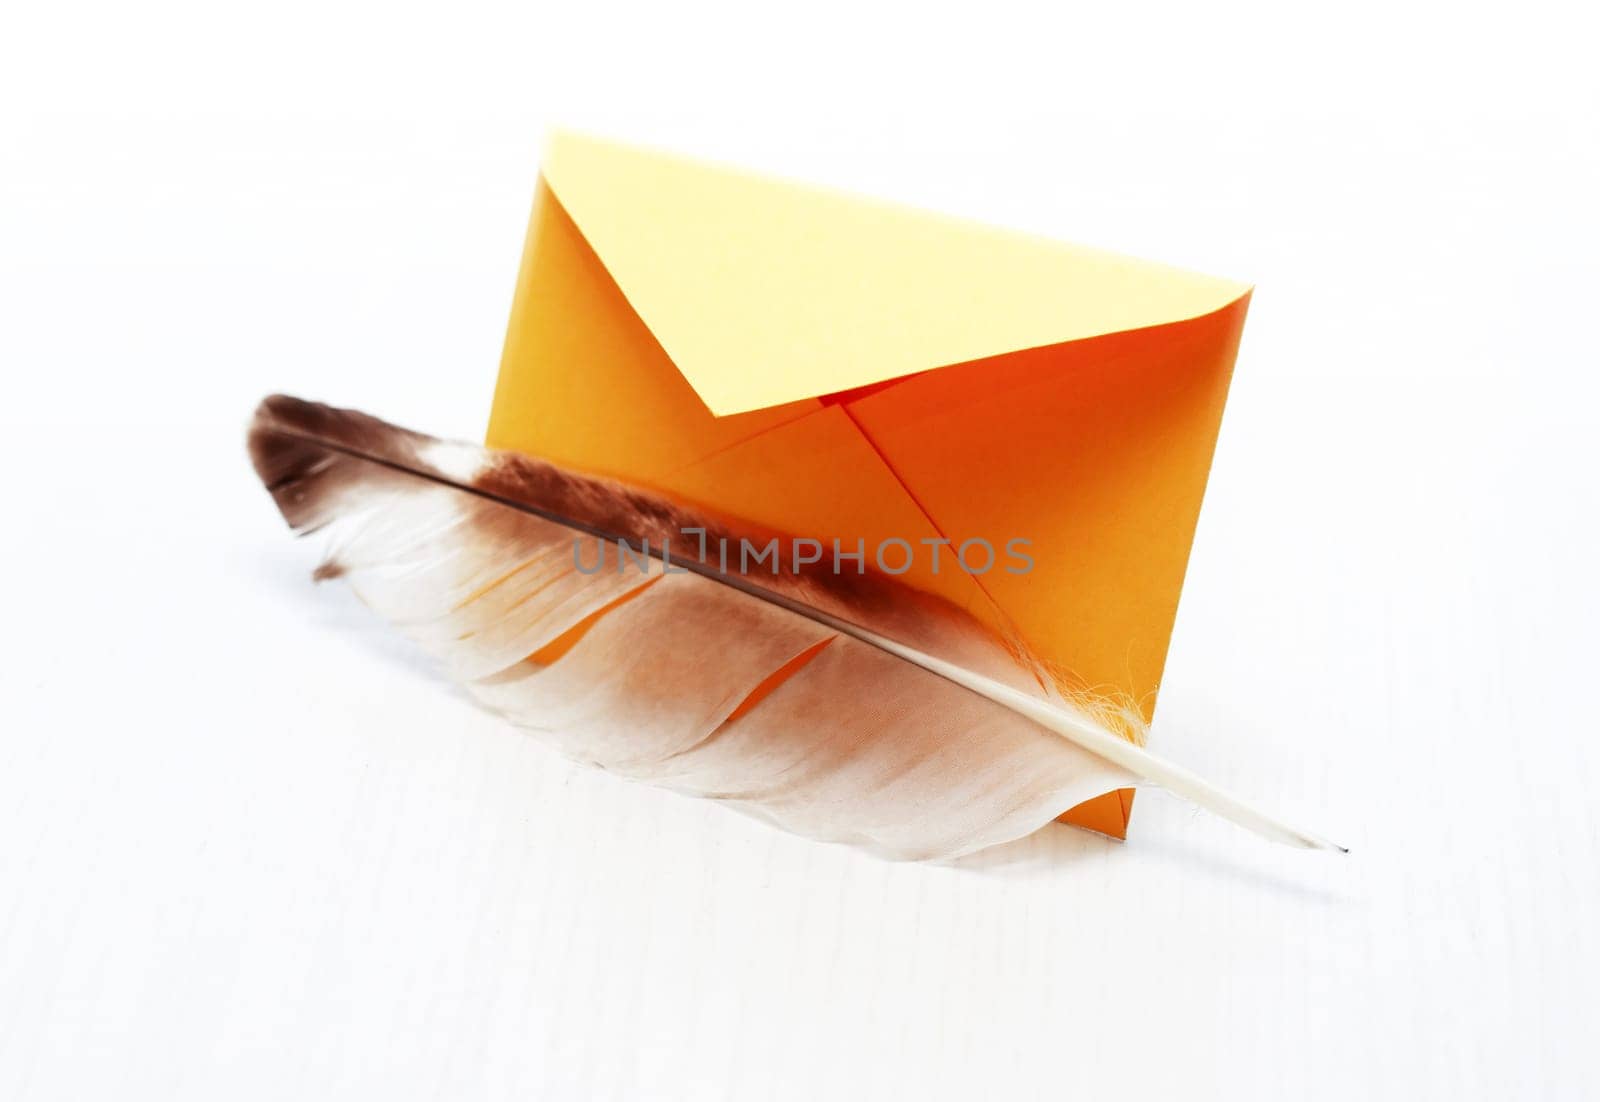 Retro message. Quill pen near yellow envelope on white background